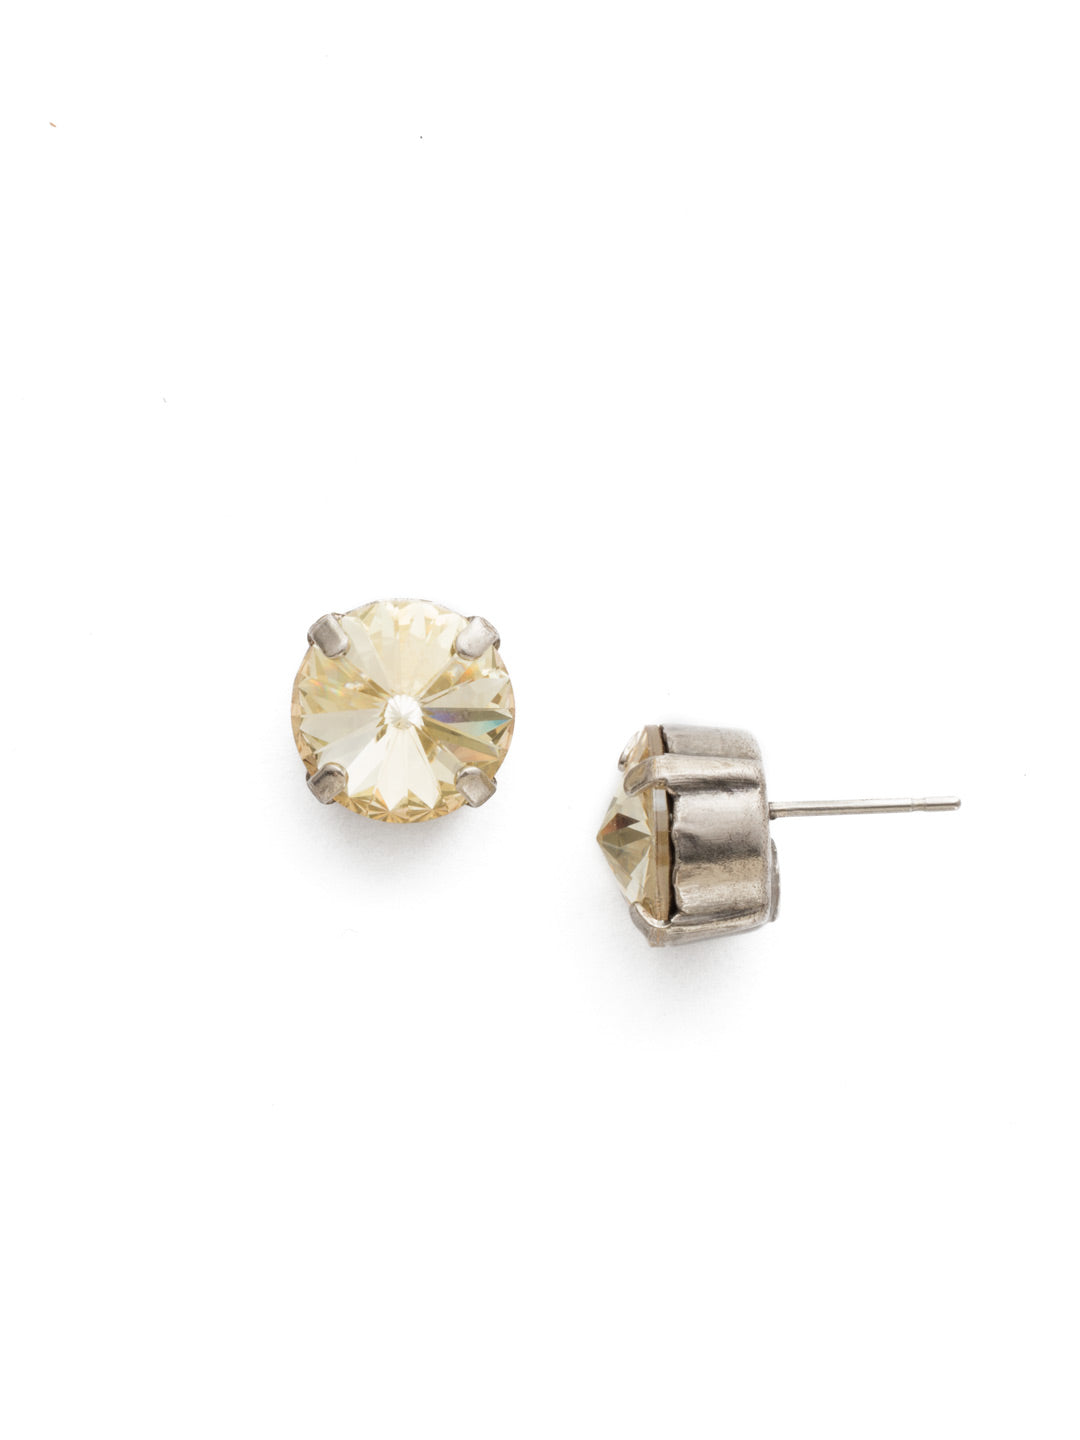 London Stud Earrings - ECM14ASCCH - <p>Everyone needs a great pair of studs. Add some classic sparkle to any occasion with these stud earrings. Need help picking a stud? <a href="https://www.sorrelli.com/blogs/sisterhood/round-stud-earrings-101-a-rundown-of-sizes-styles-and-sparkle">Check out our size guide!</a> From Sorrelli's Crystal Champagne collection in our Antique Silver-tone finish.</p>